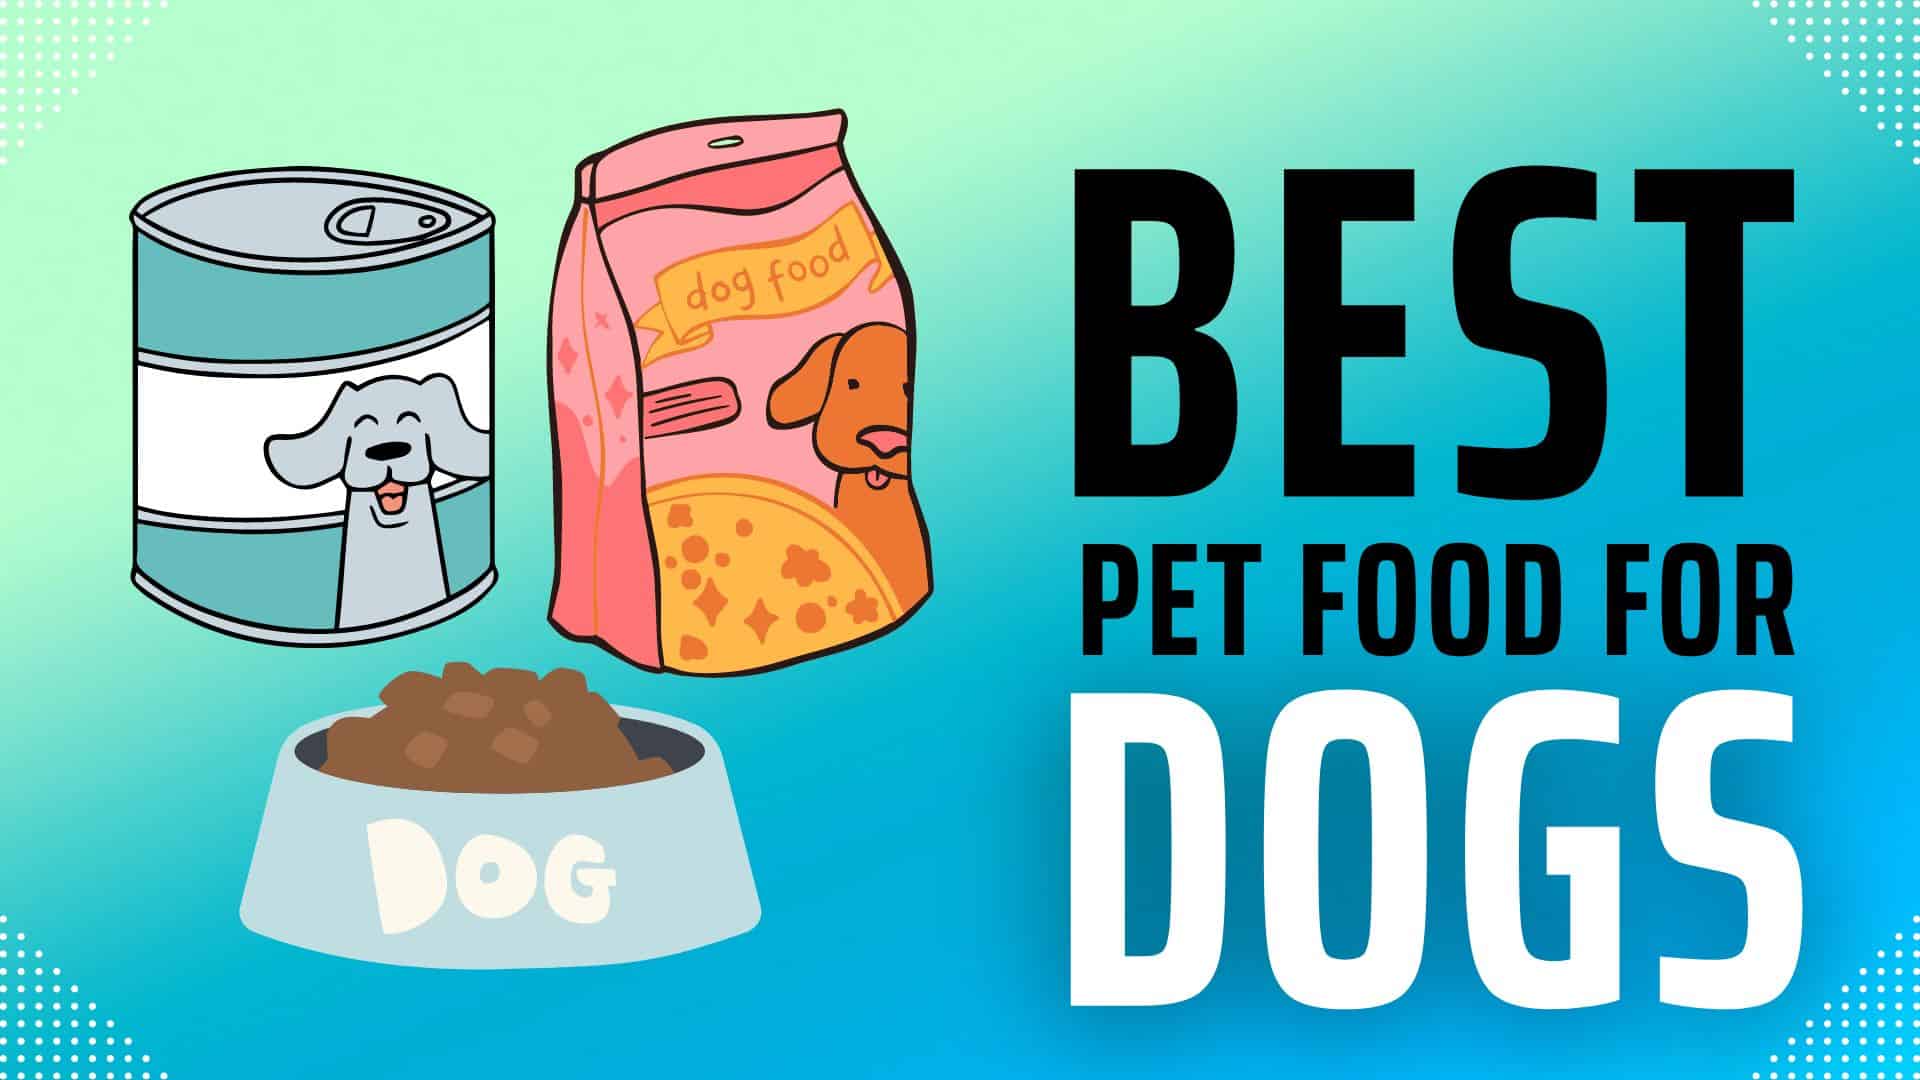 Choosing one dog food for puppies or for adult dogs